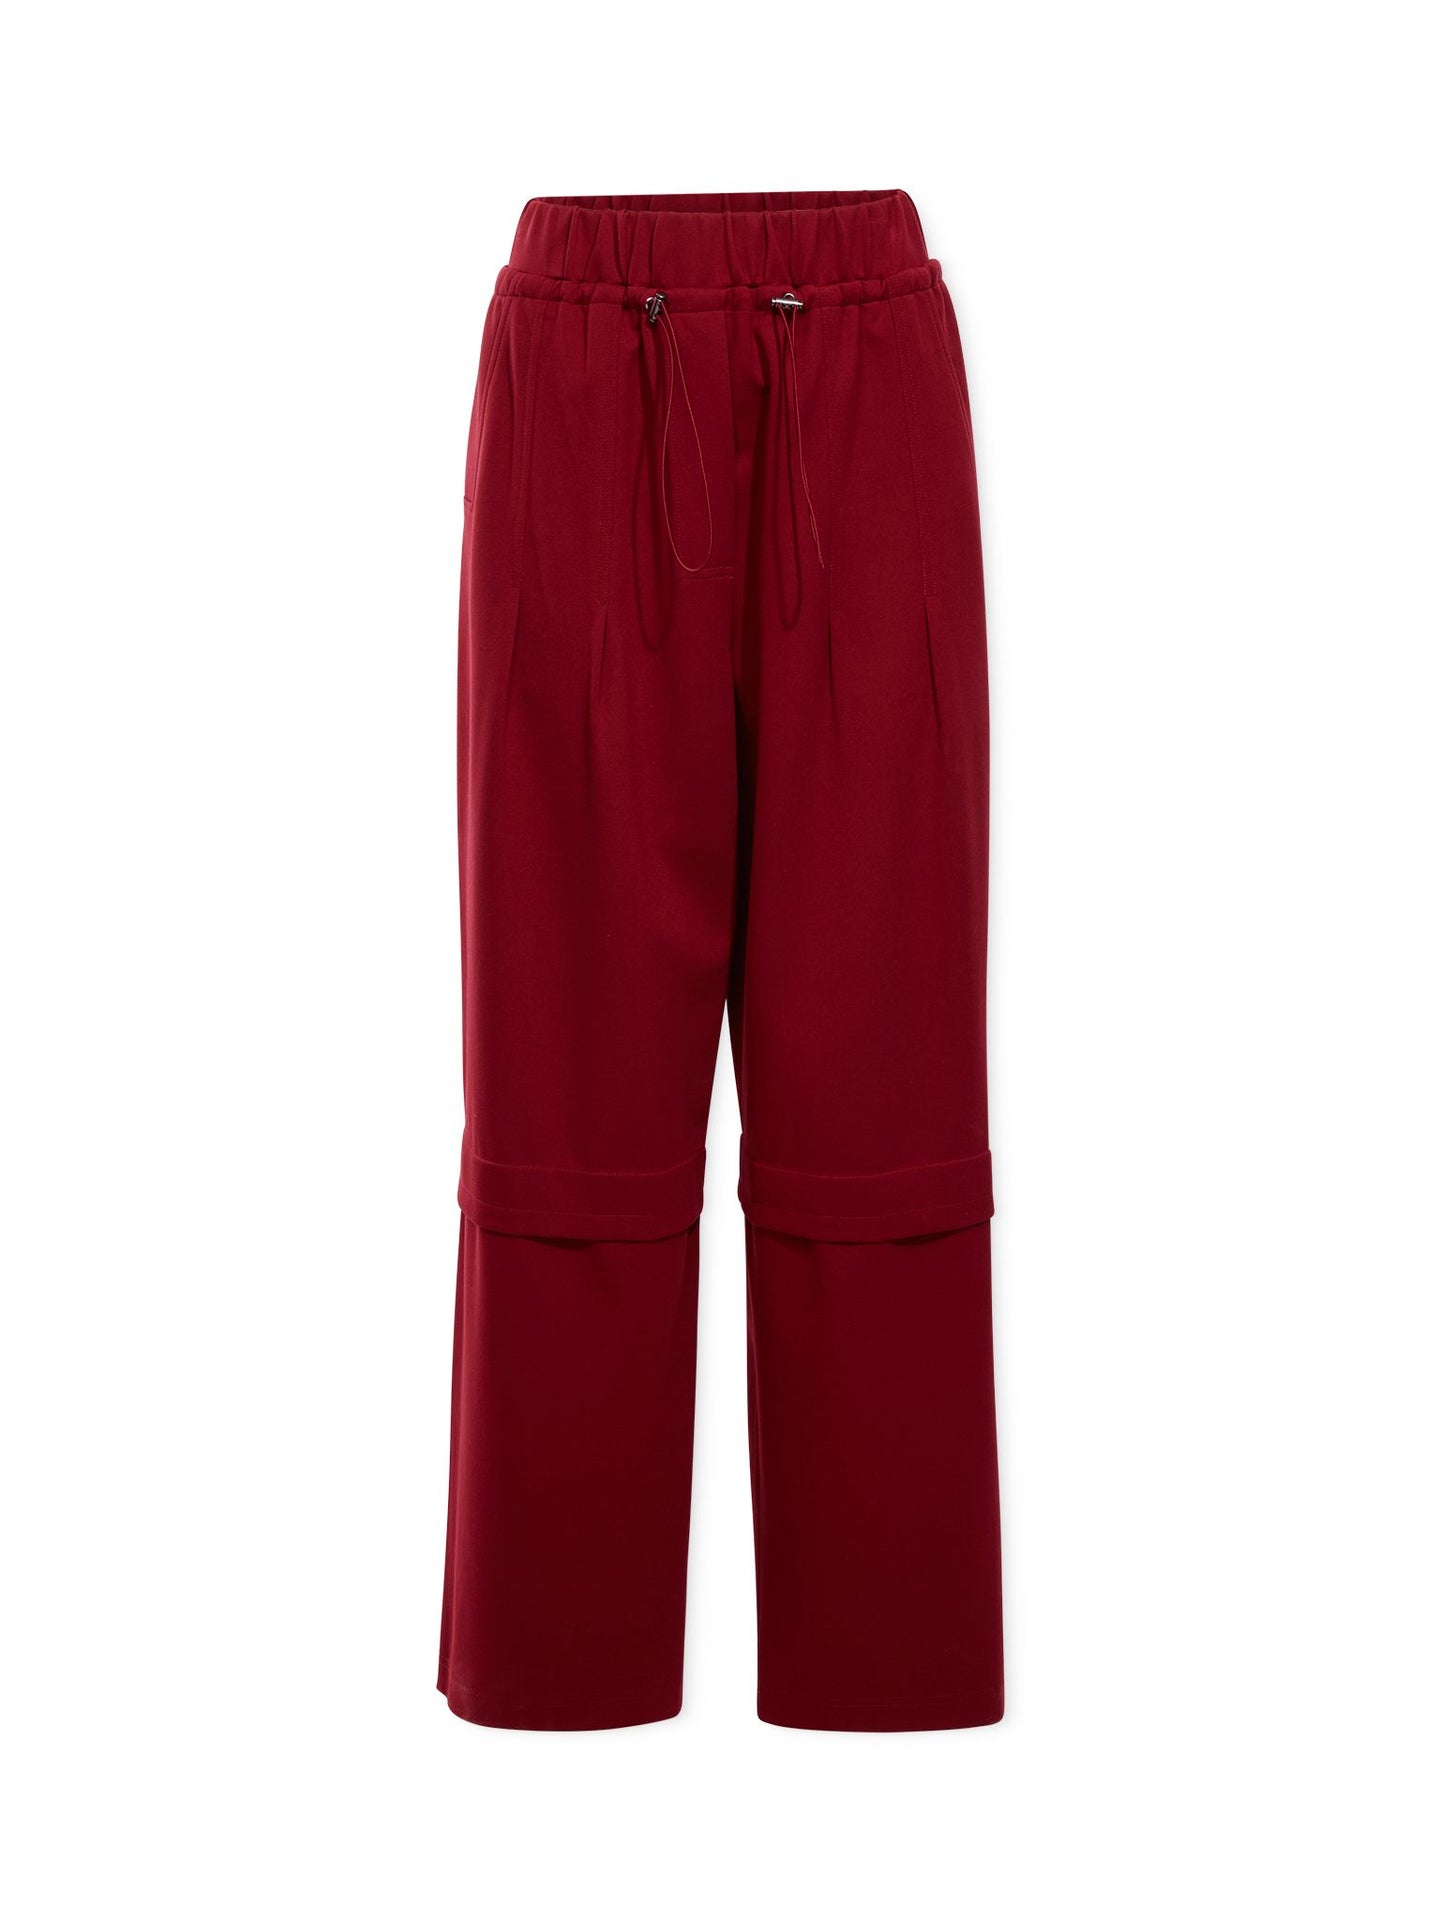 02 KNIT PLEATED TROUSER